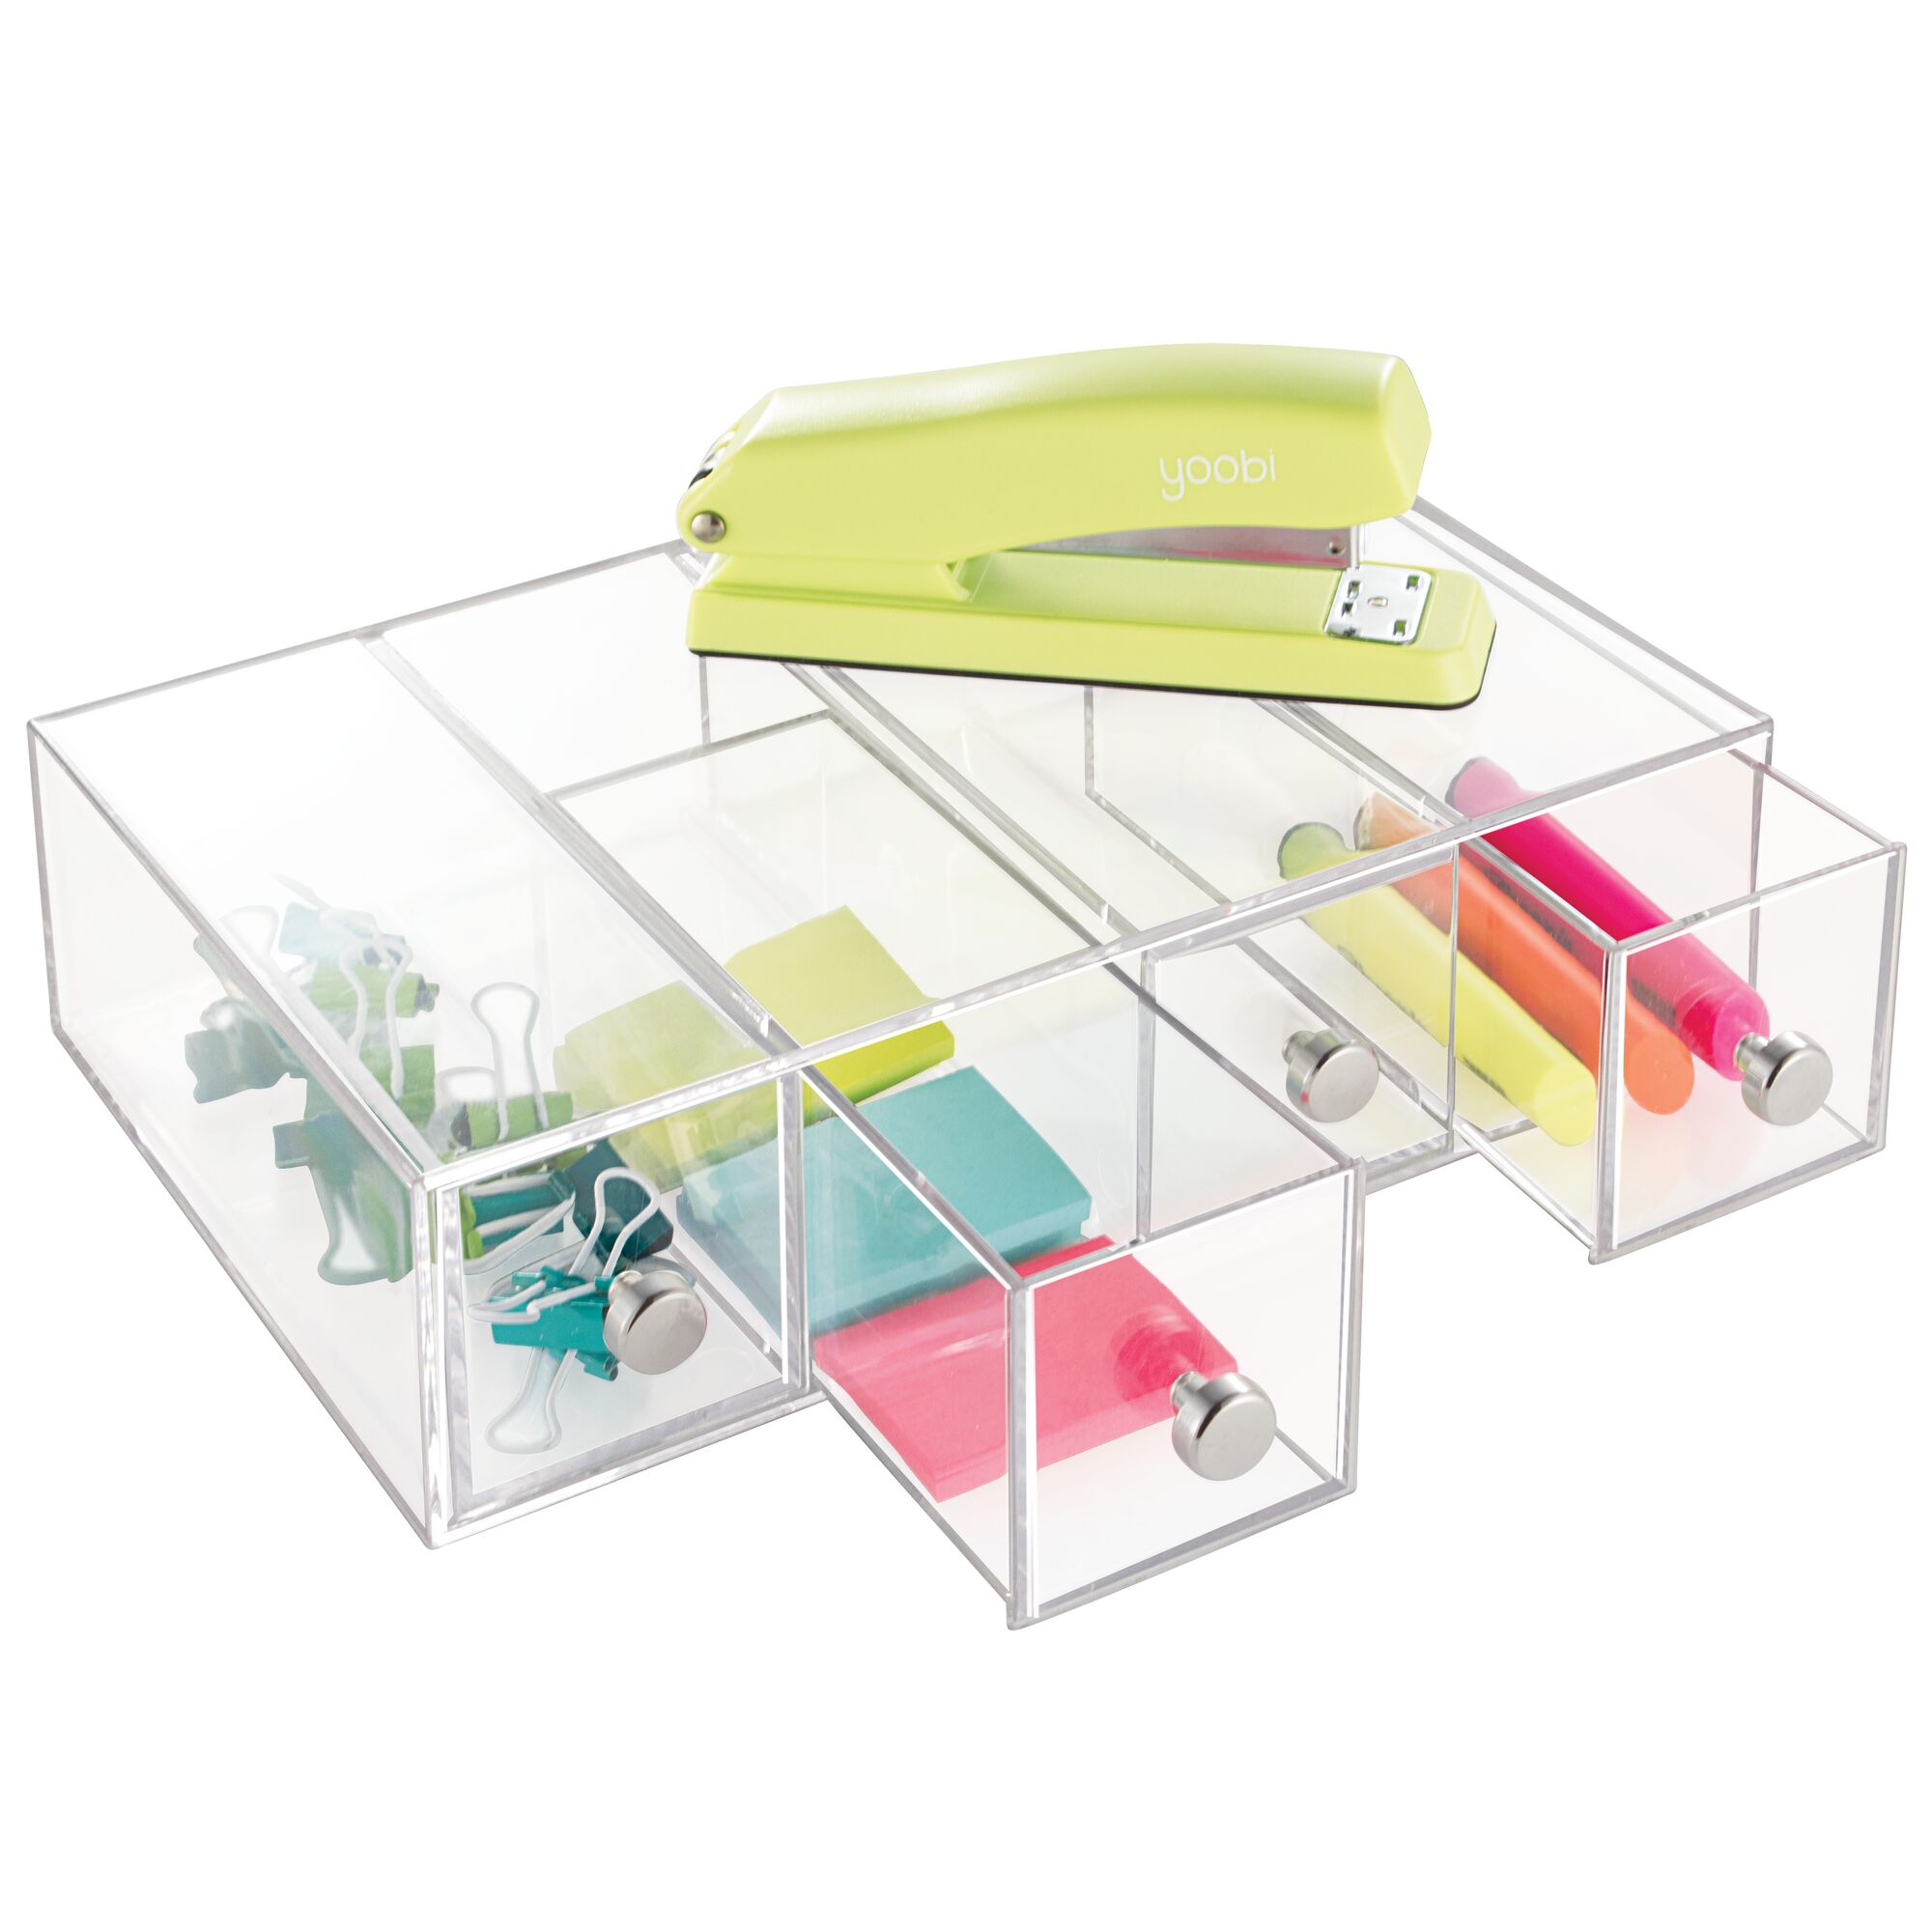 iDesign Clear Storage and Organization 4-Drawer Towers - image 3 of 8